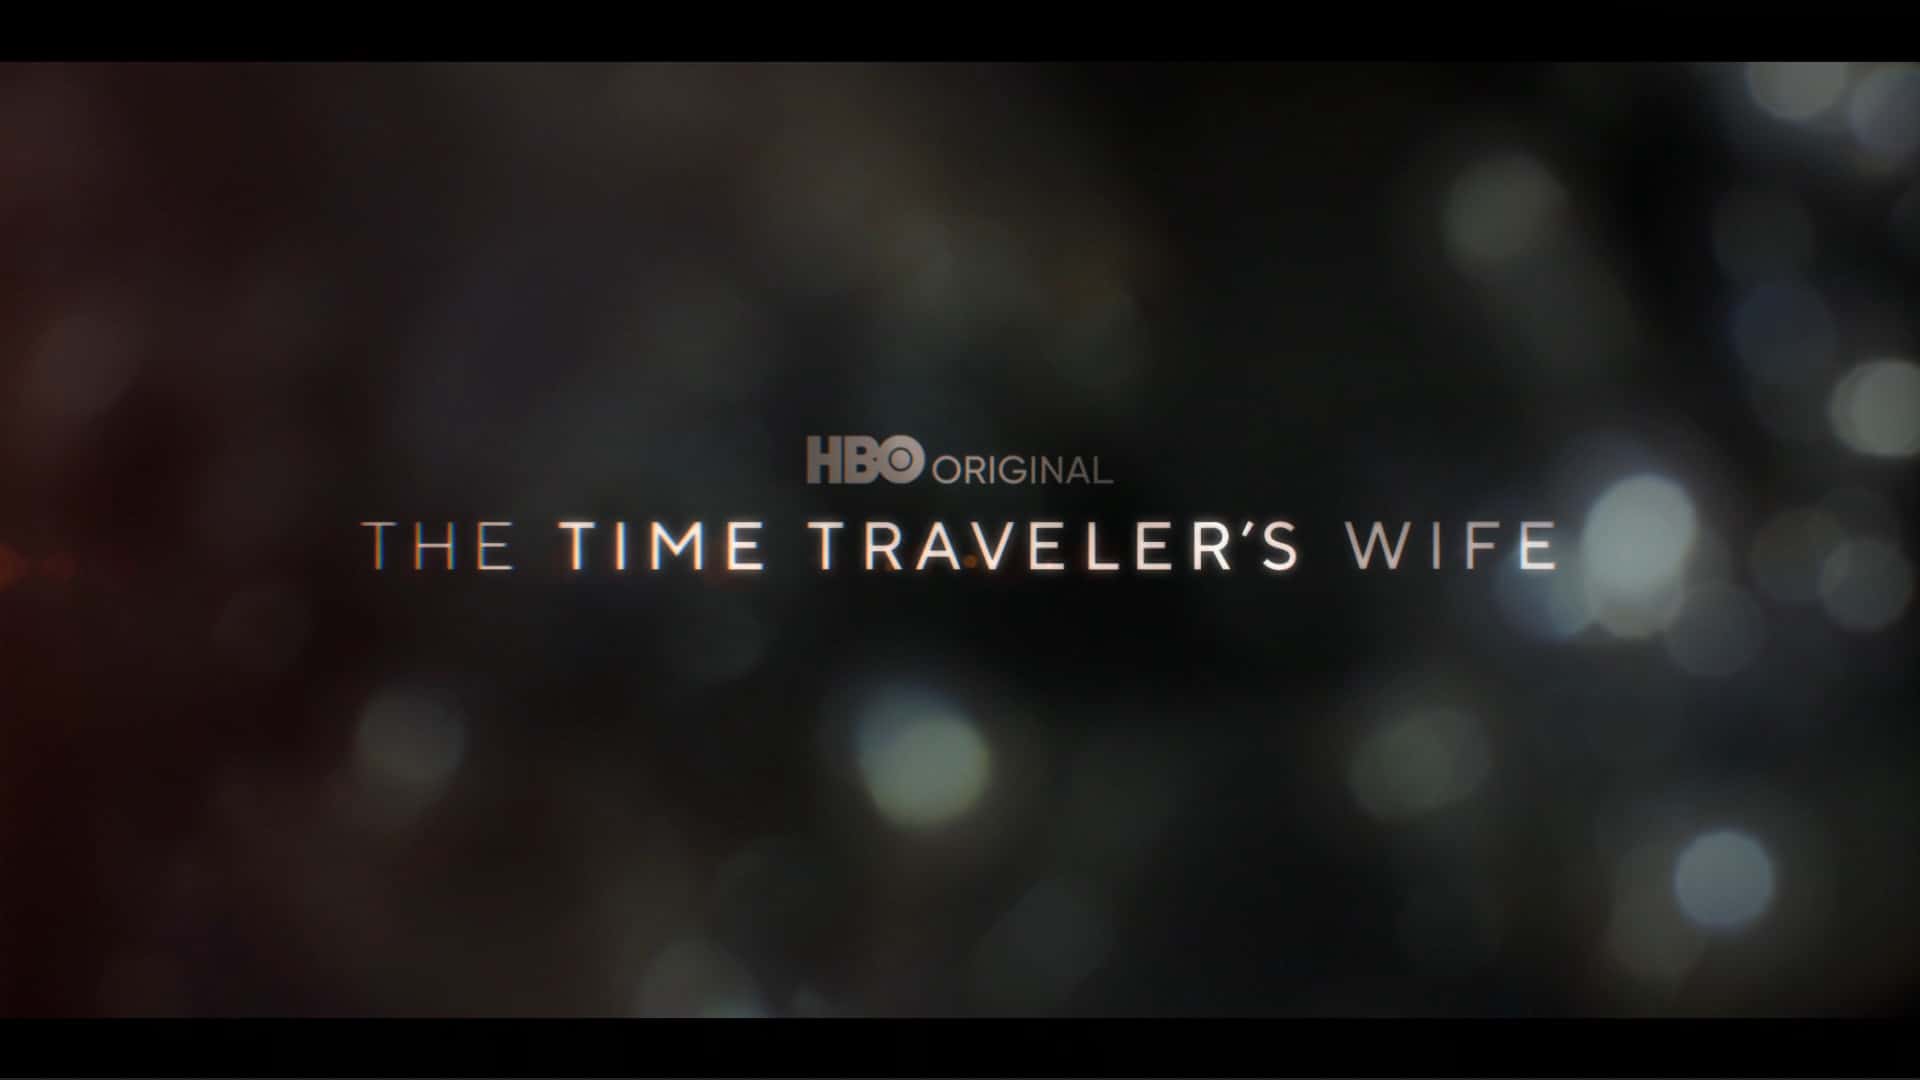 The Time Traveler’s Wife Cast & Character Guide